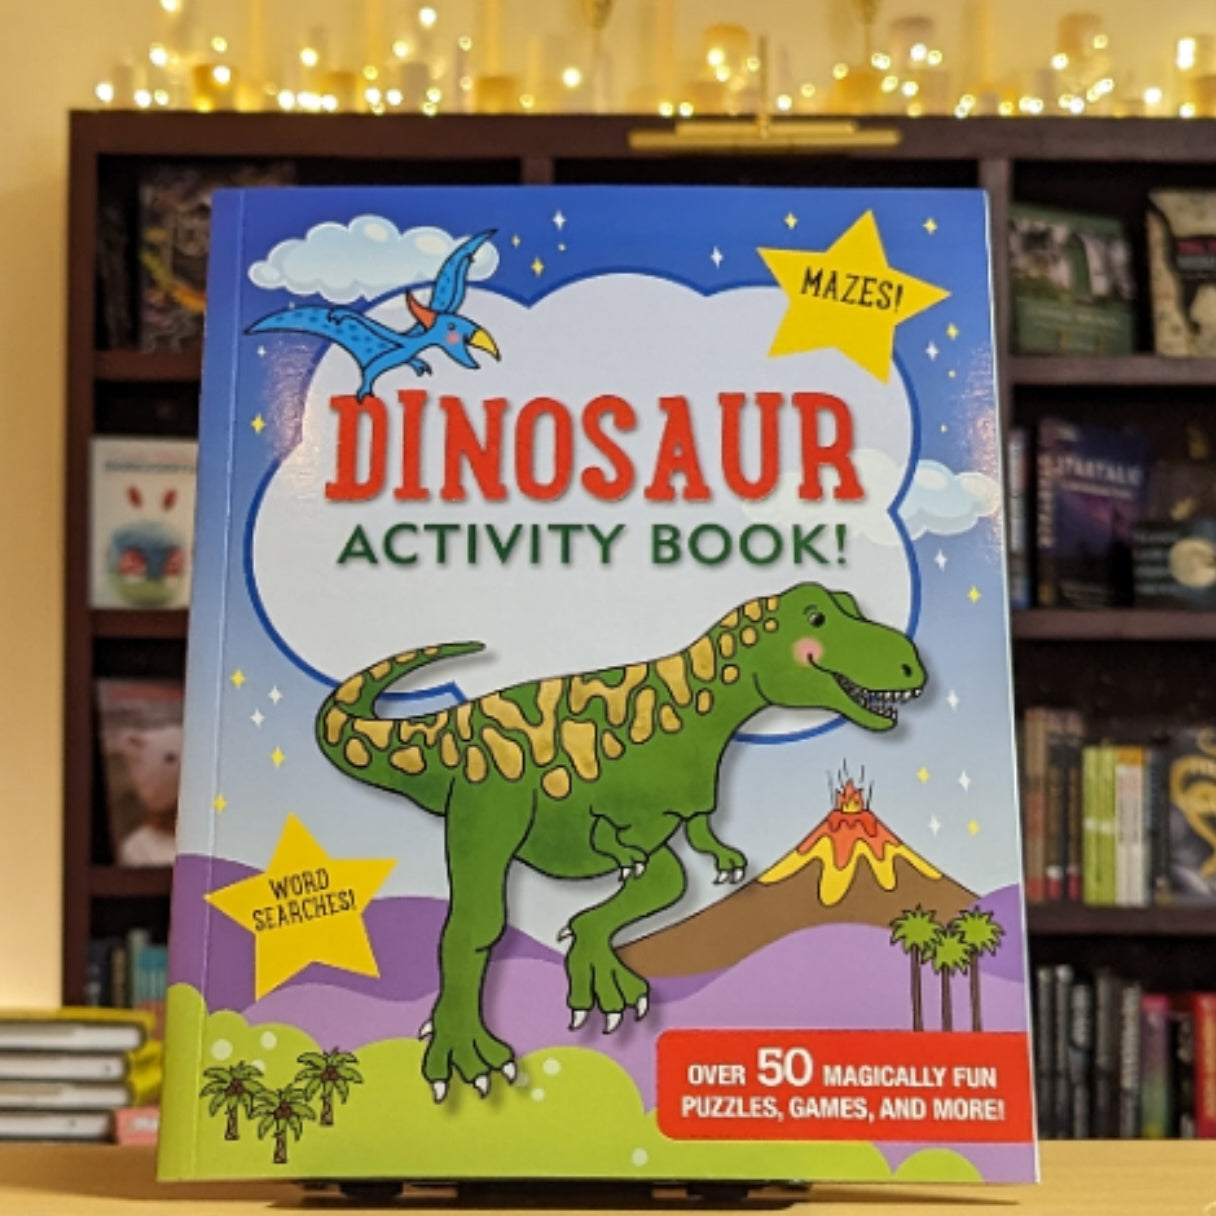 Dinosaur Activity Book! (over 50 magically fun puzzles, games, and more!)